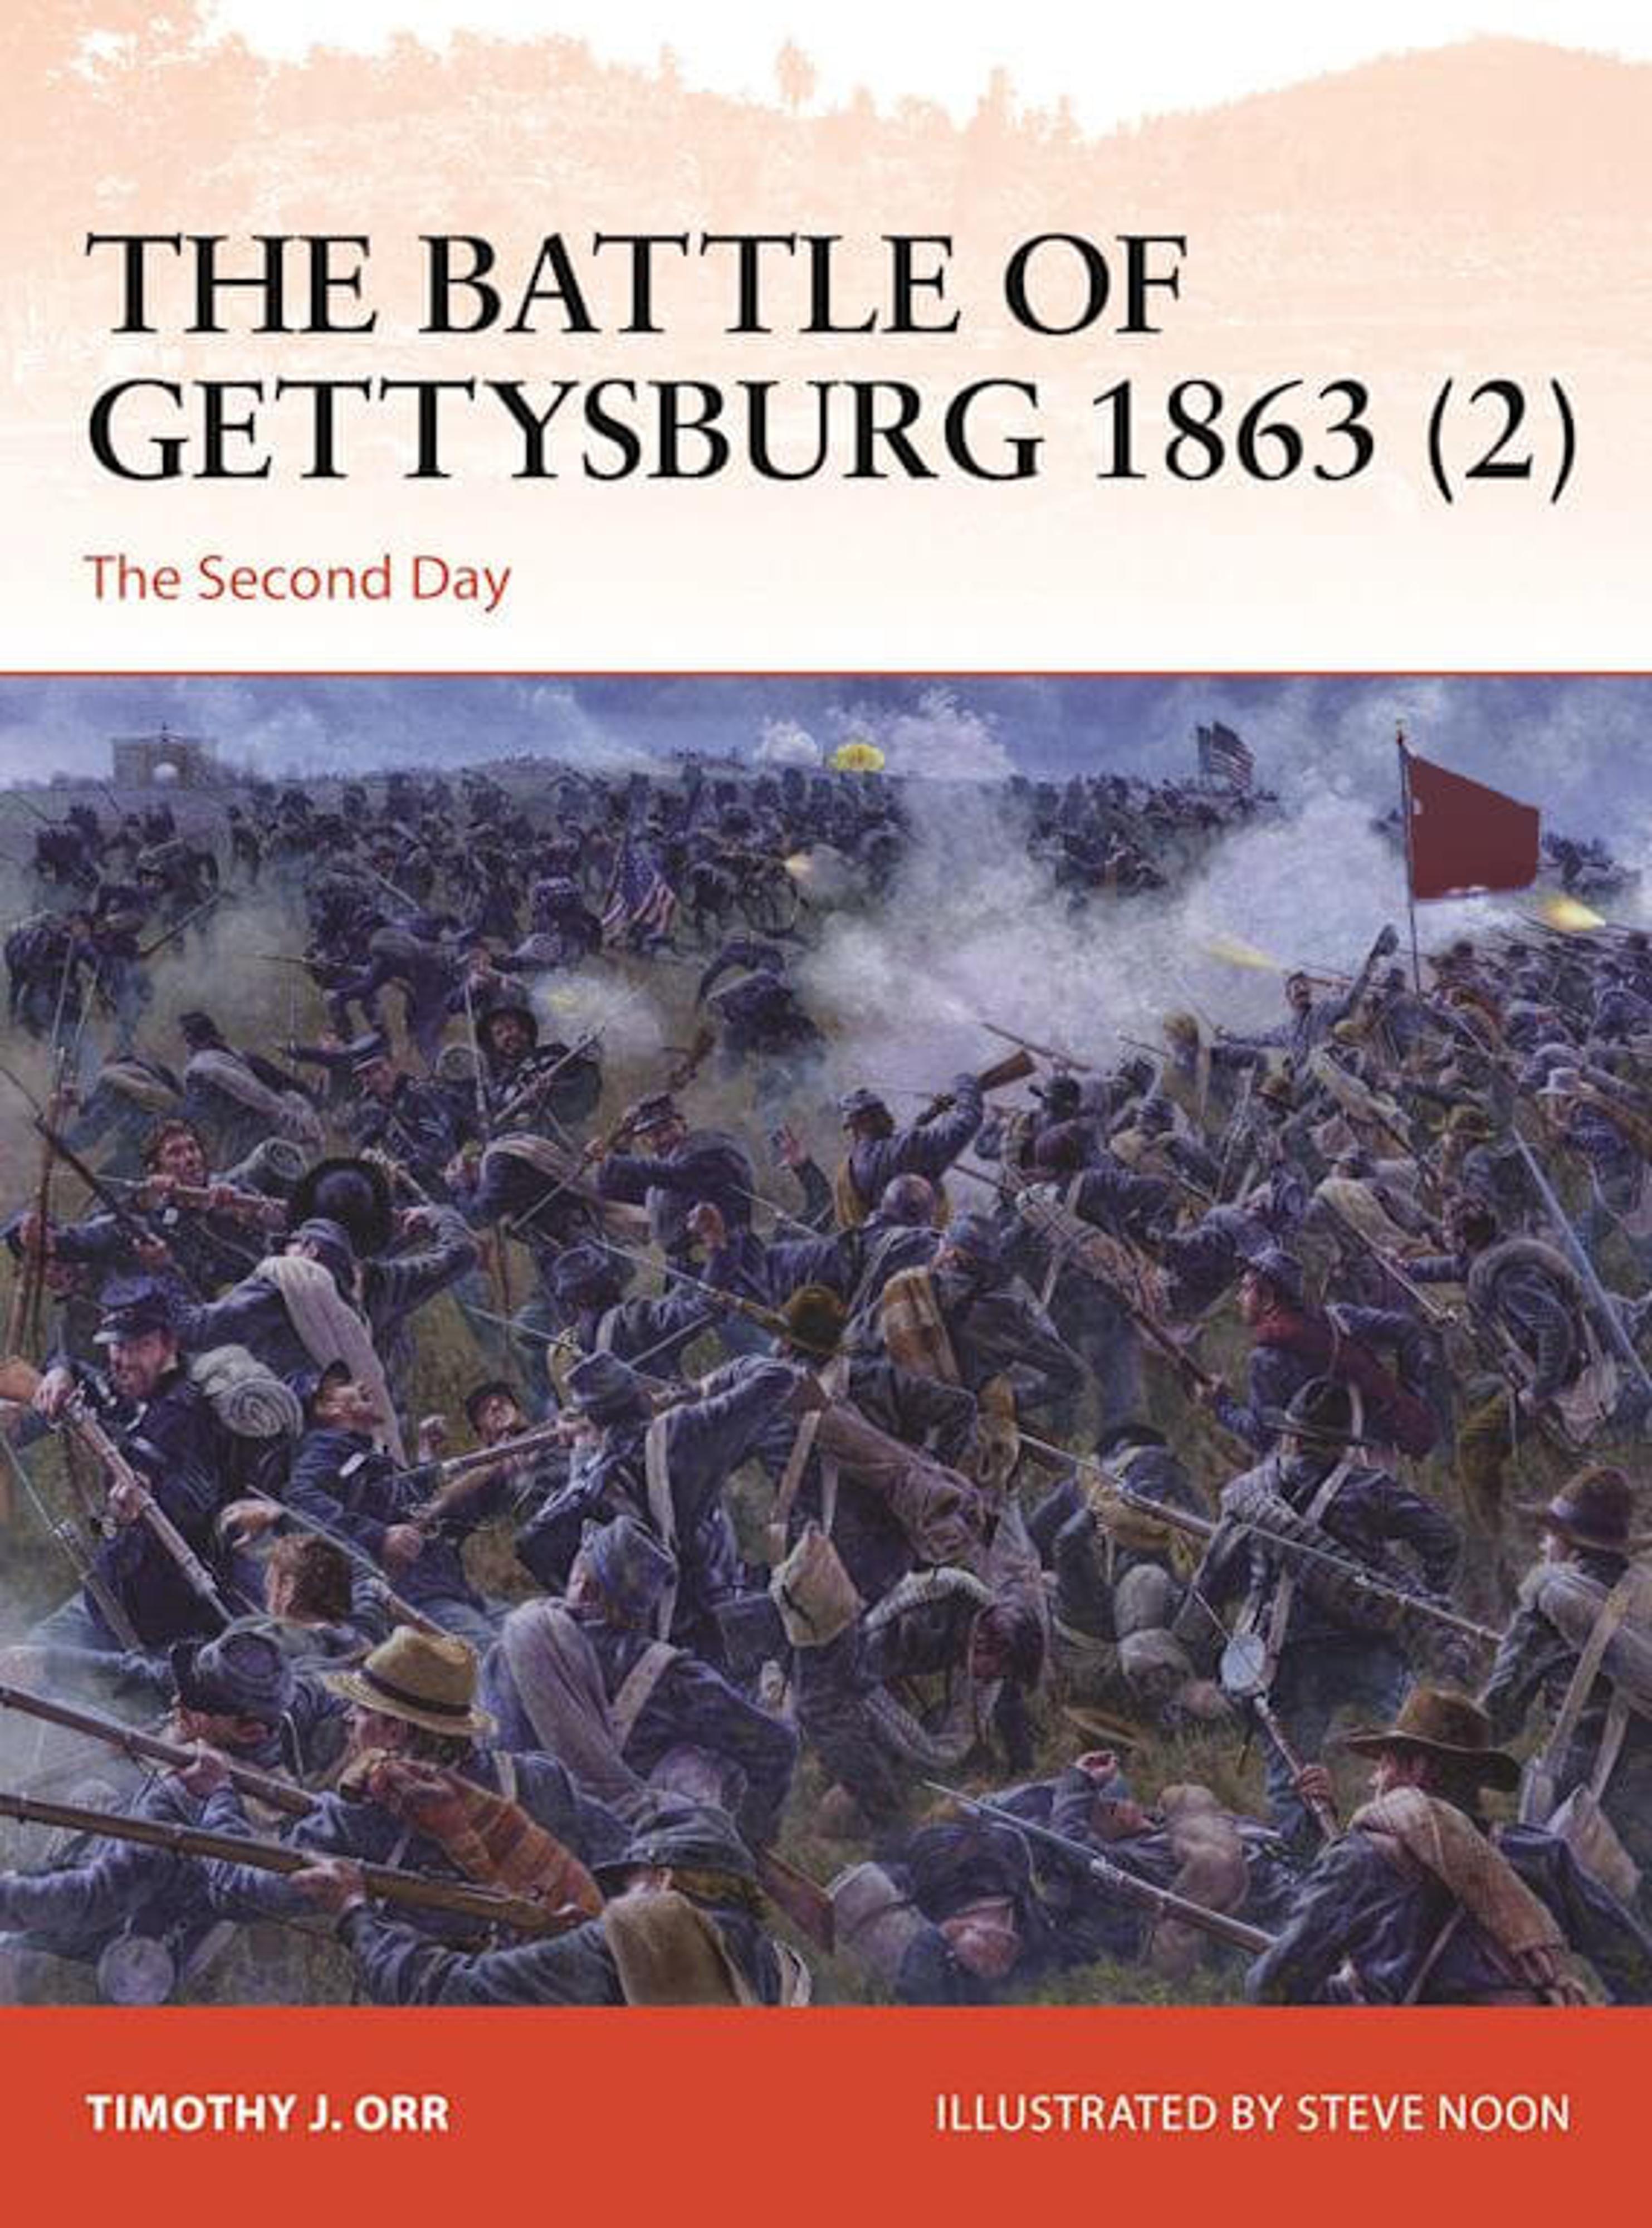 The Battle of Gettysburg: The Second Day